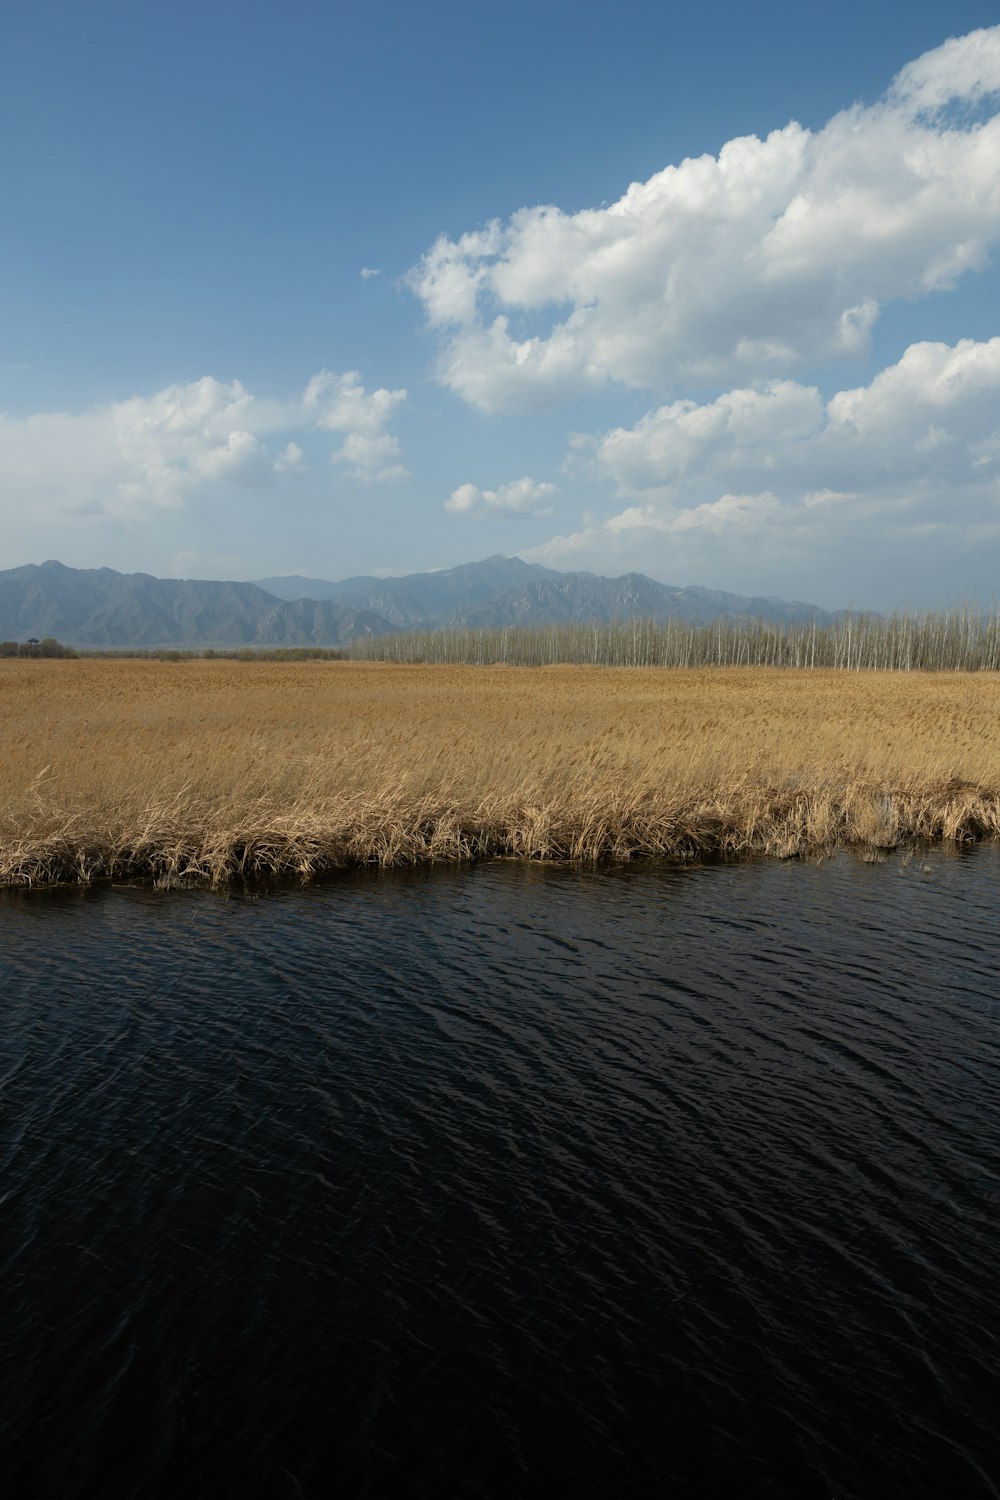 a body of water surrounded by dry grass